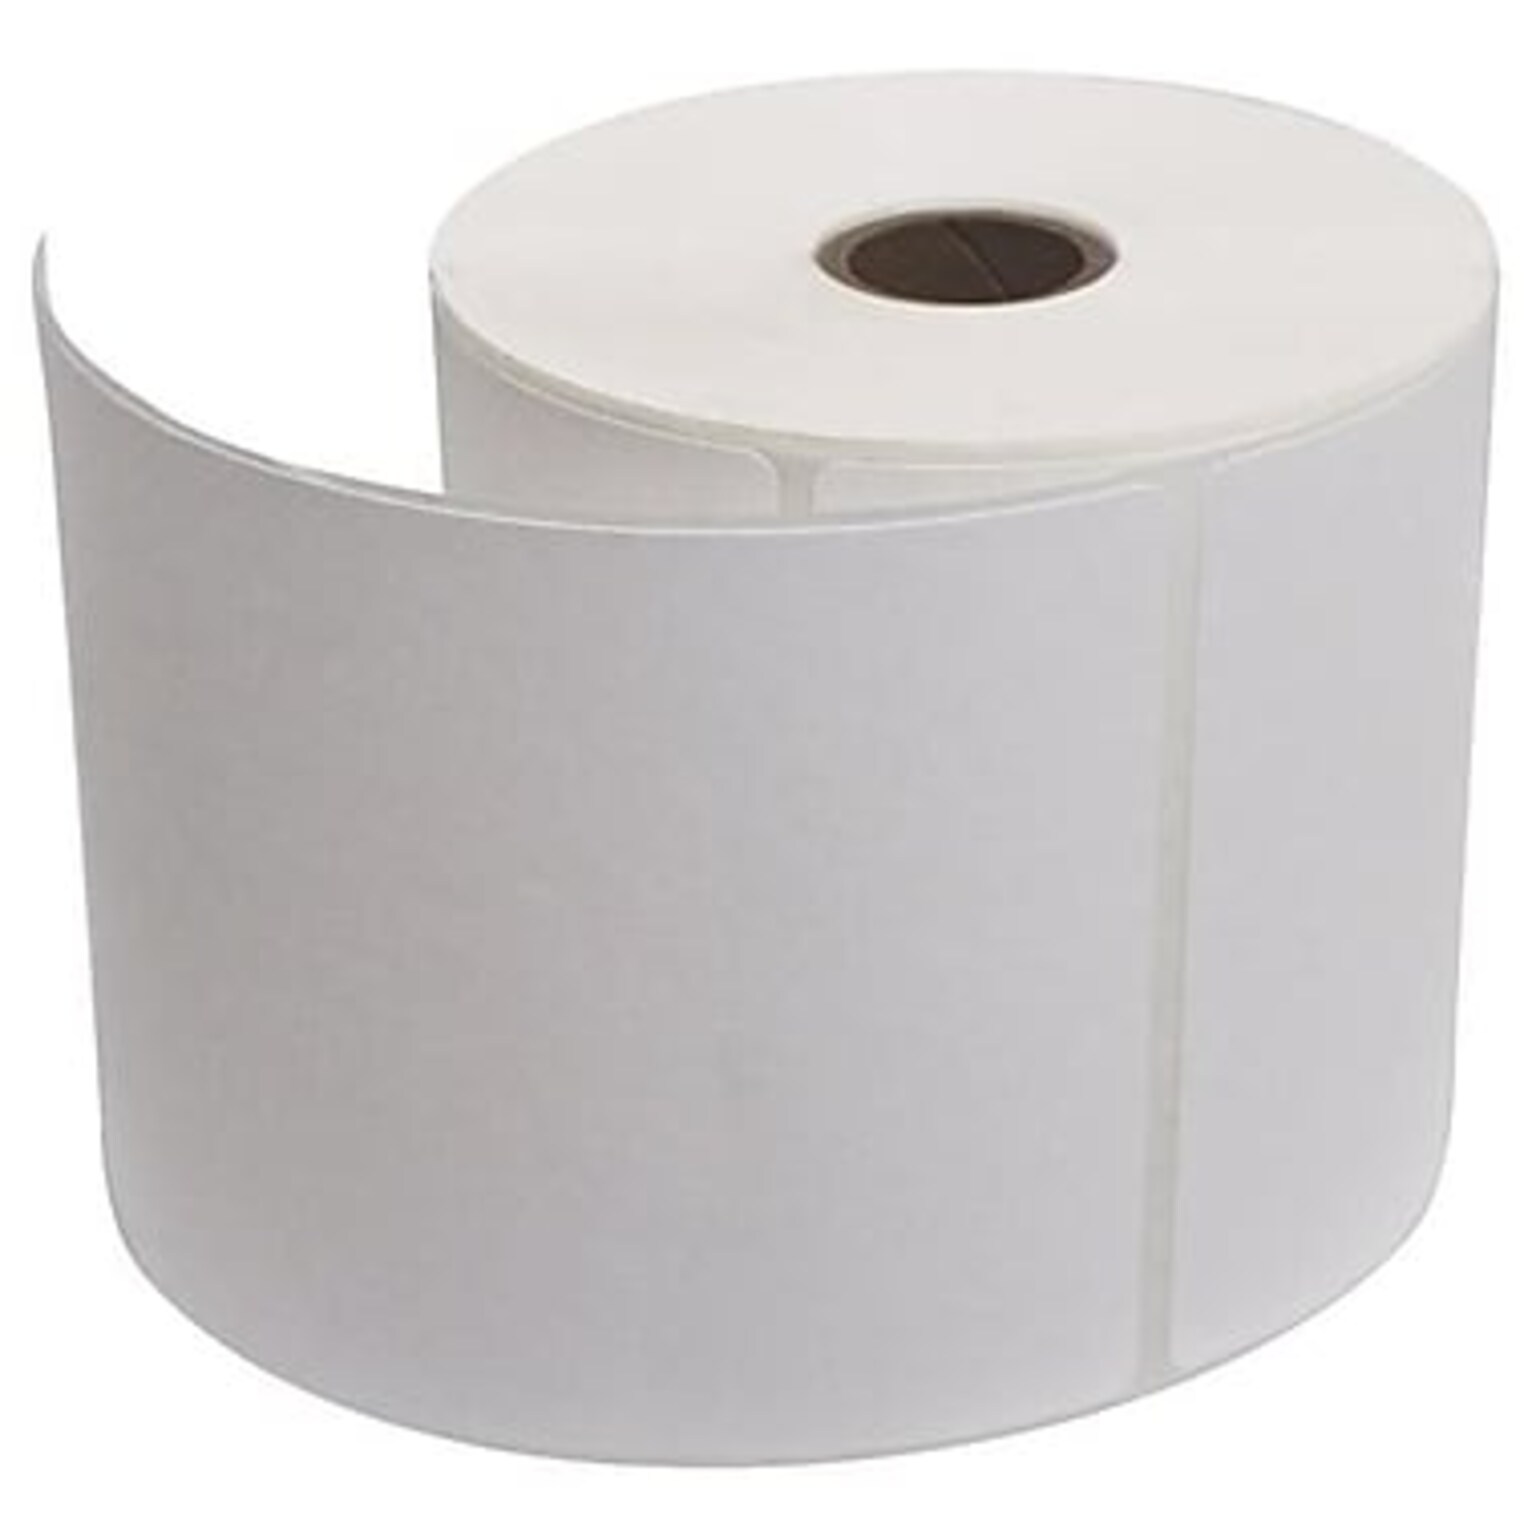 Vangoddy Industrial Thermal Labels, 4 x 6, White, 250 Labels/Roll, 4 Rolls/Pack, 1000 Labels/Box (PT_000000930)